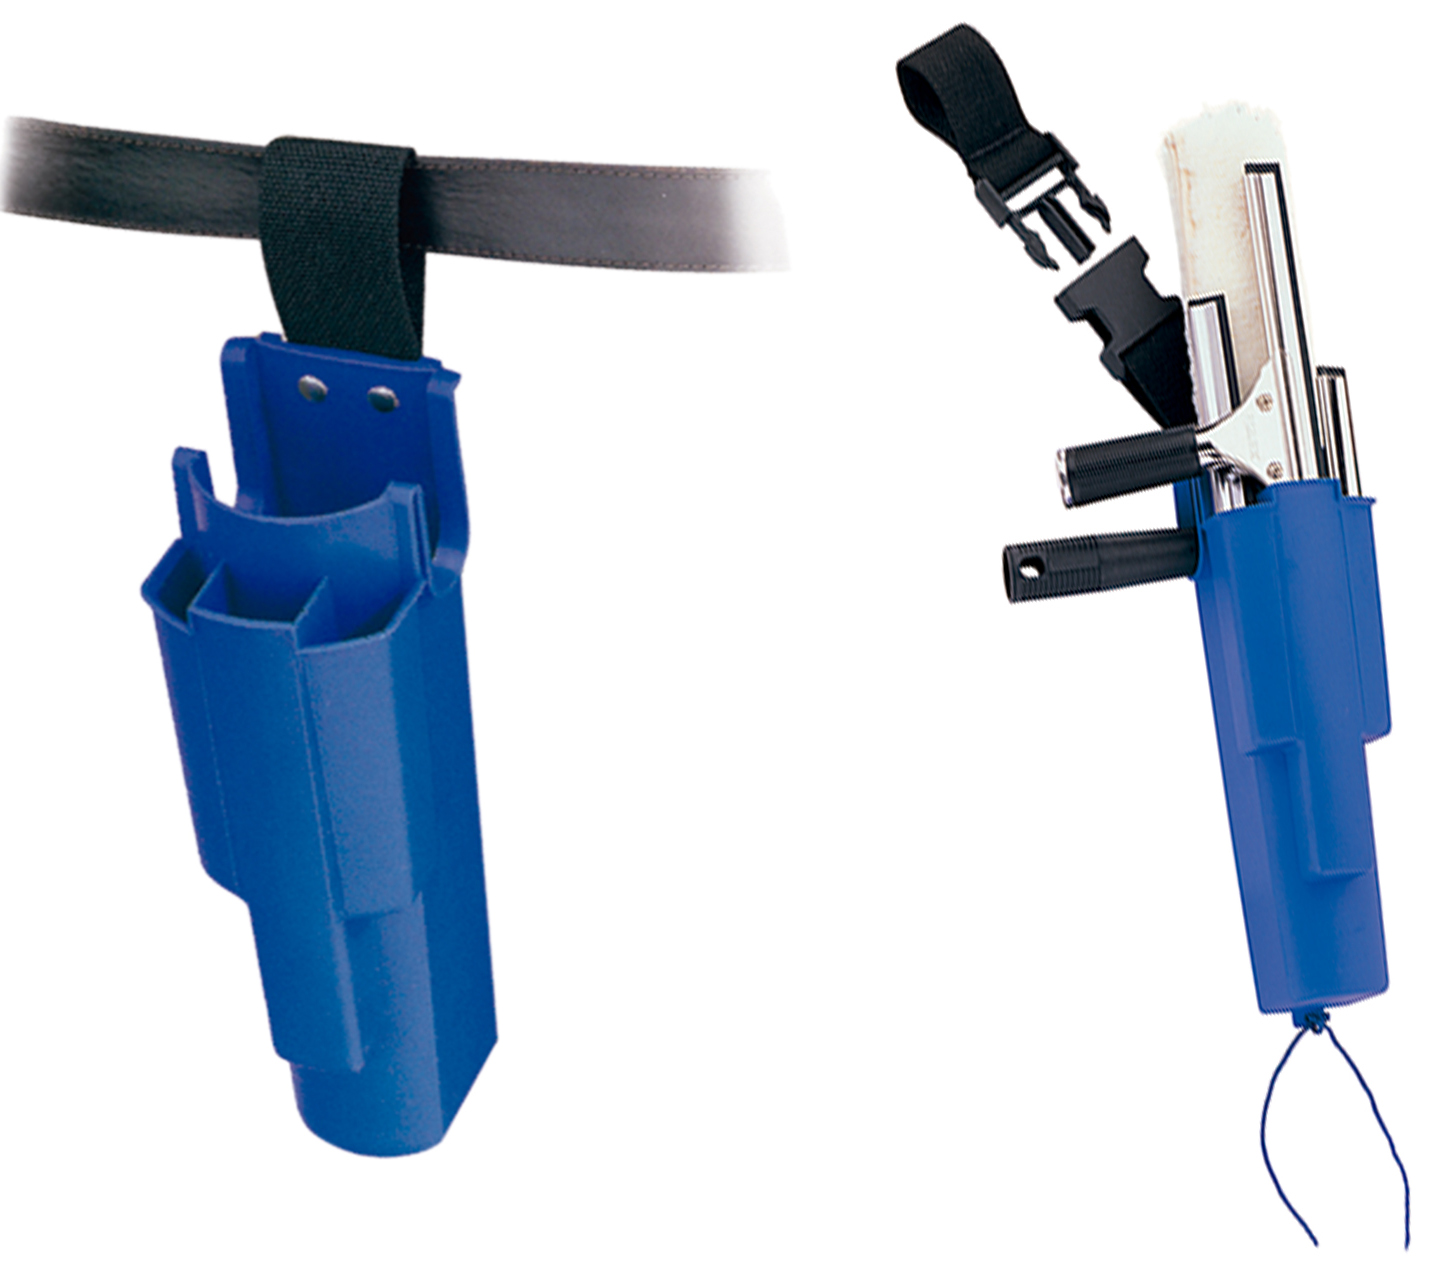 Pulex® Tubex™ Detachable Plastic Holster, for Window Cleaning Tools